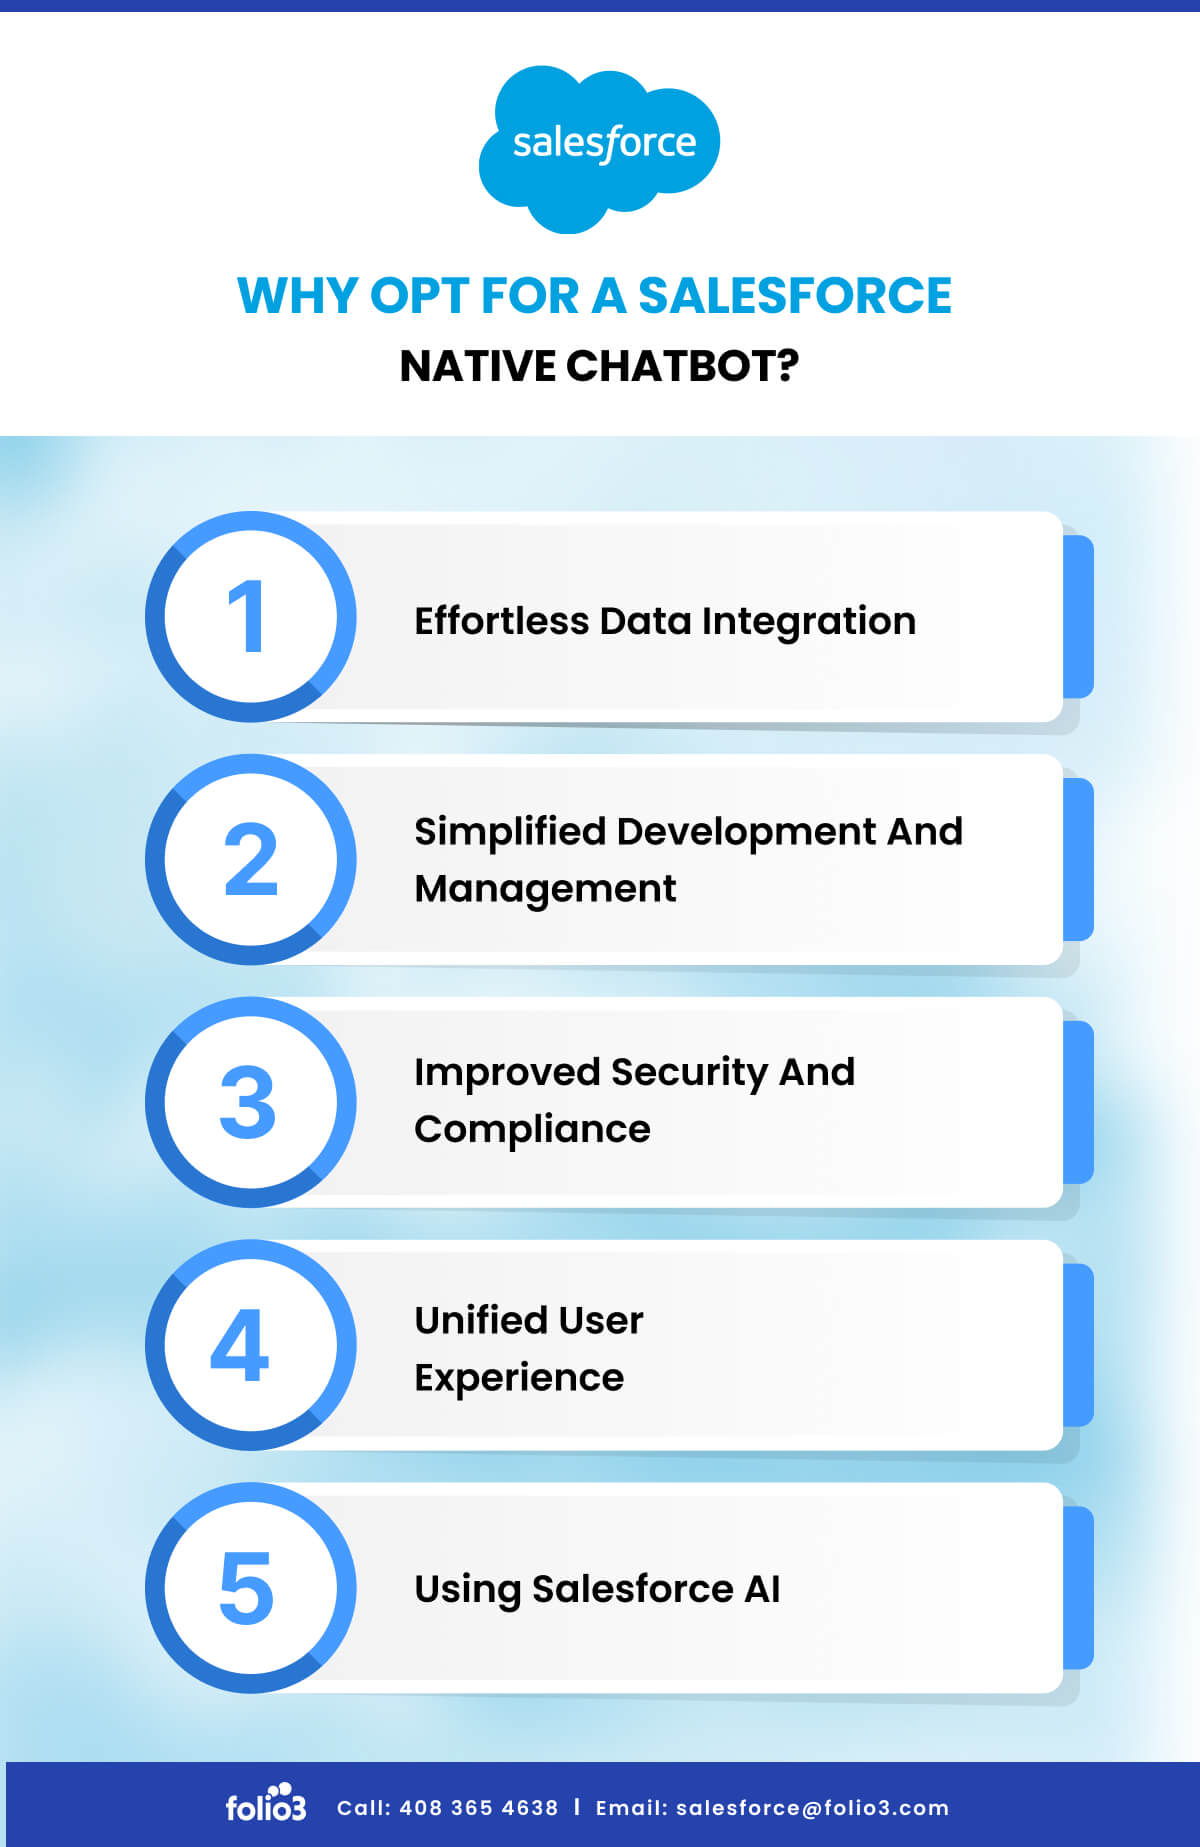 Why Opt for a Salesforce Native Chatbot